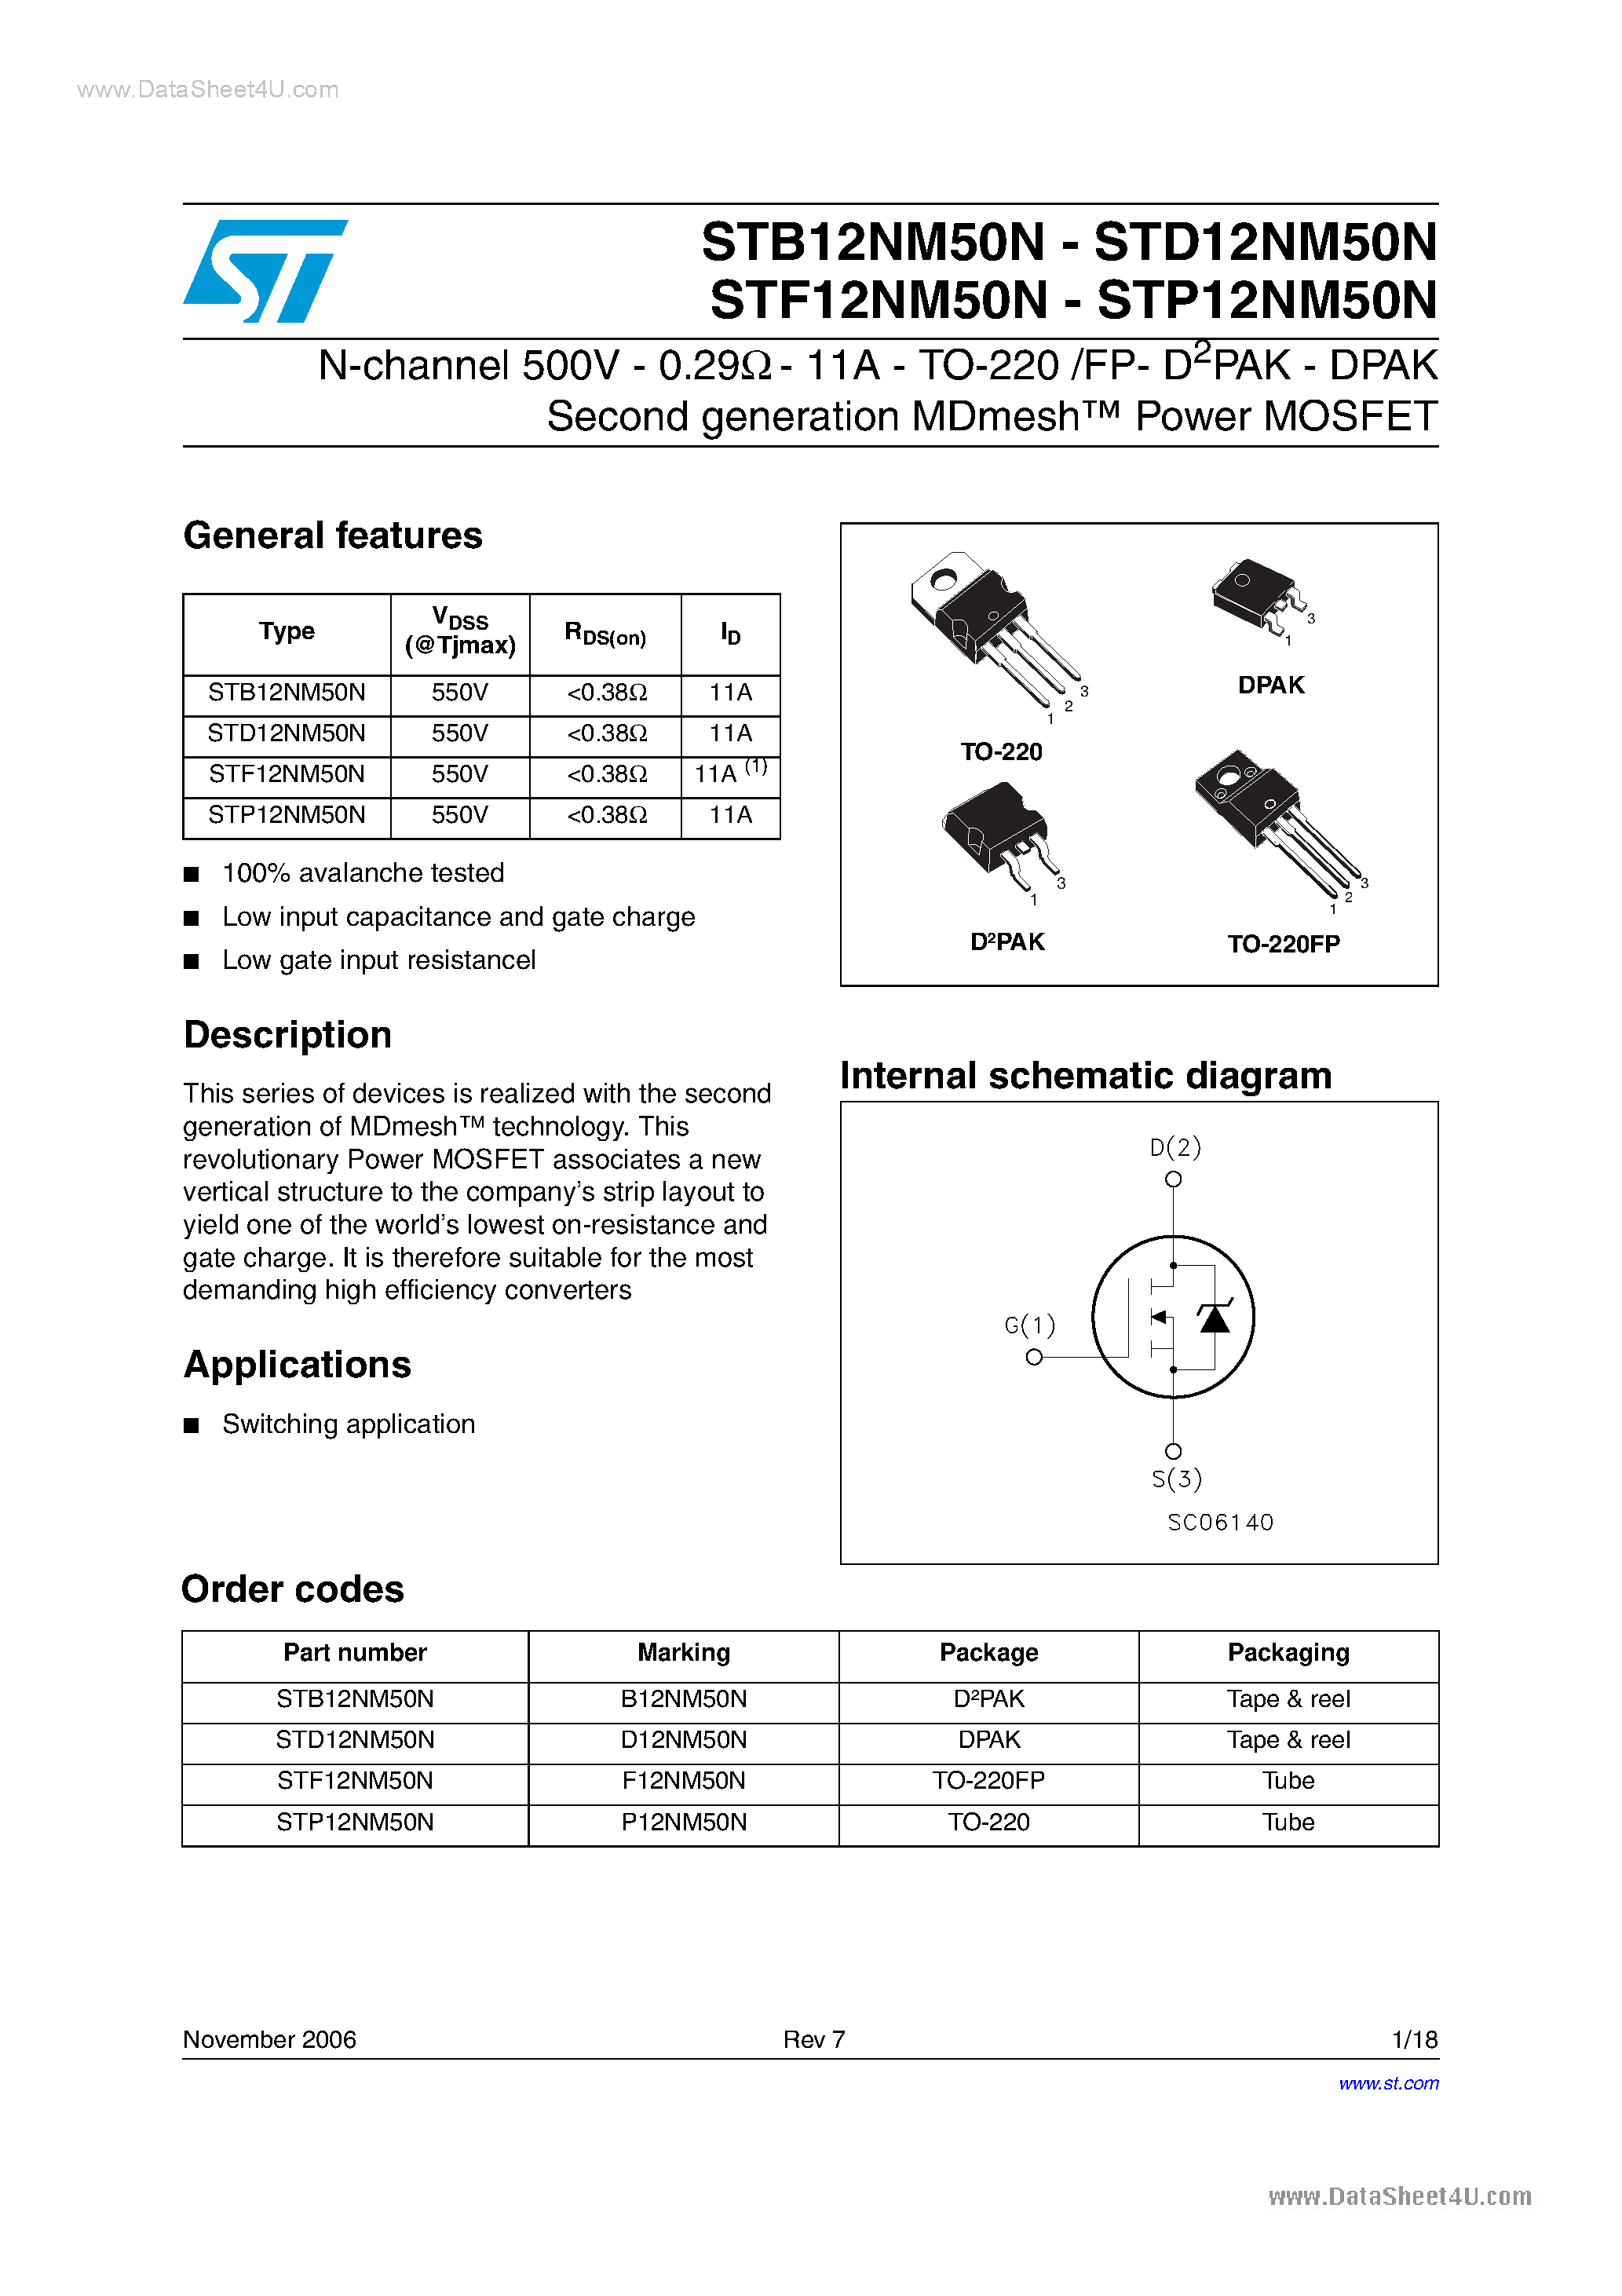 Datasheet STP12NM50N - N-channel Power MOSFET page 1